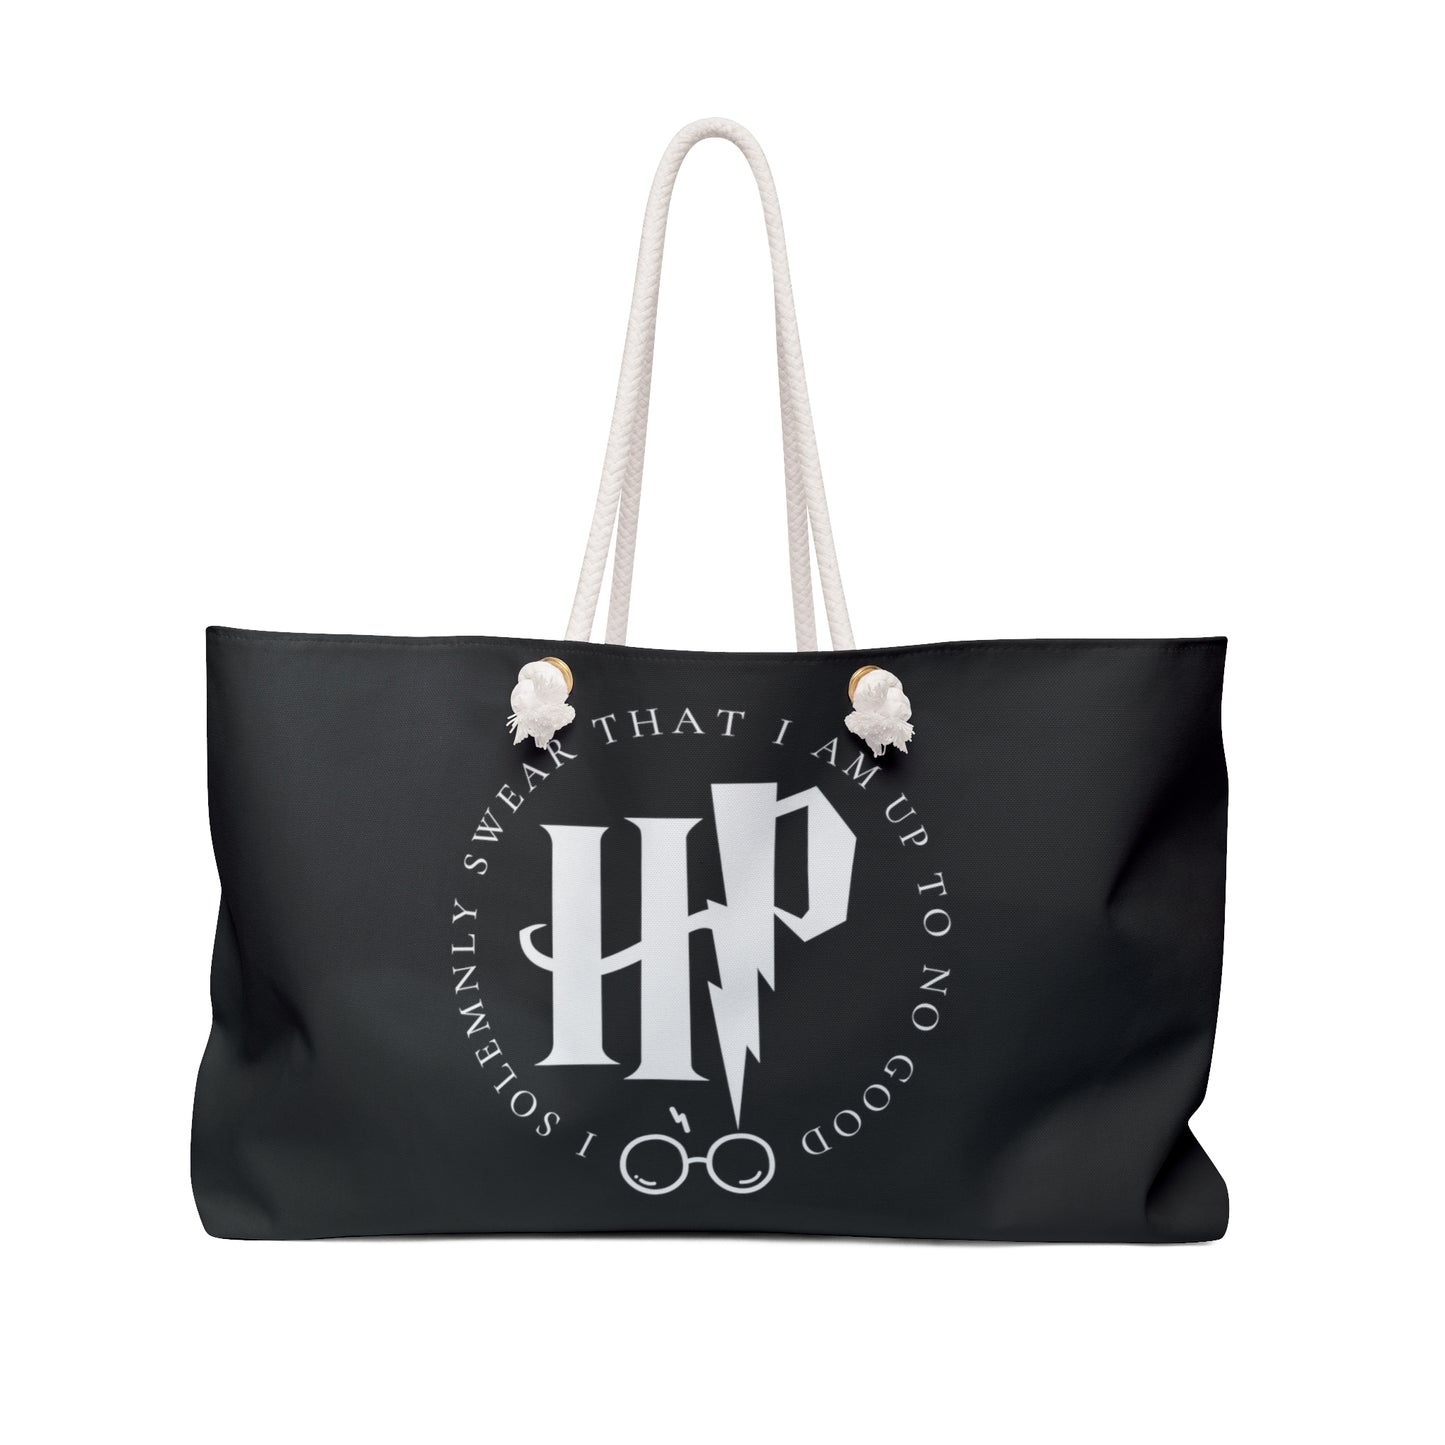 Harry Potter - "I Solemnly Swear That I Am Up To No Good" Weekender Bag (Front and Bag)